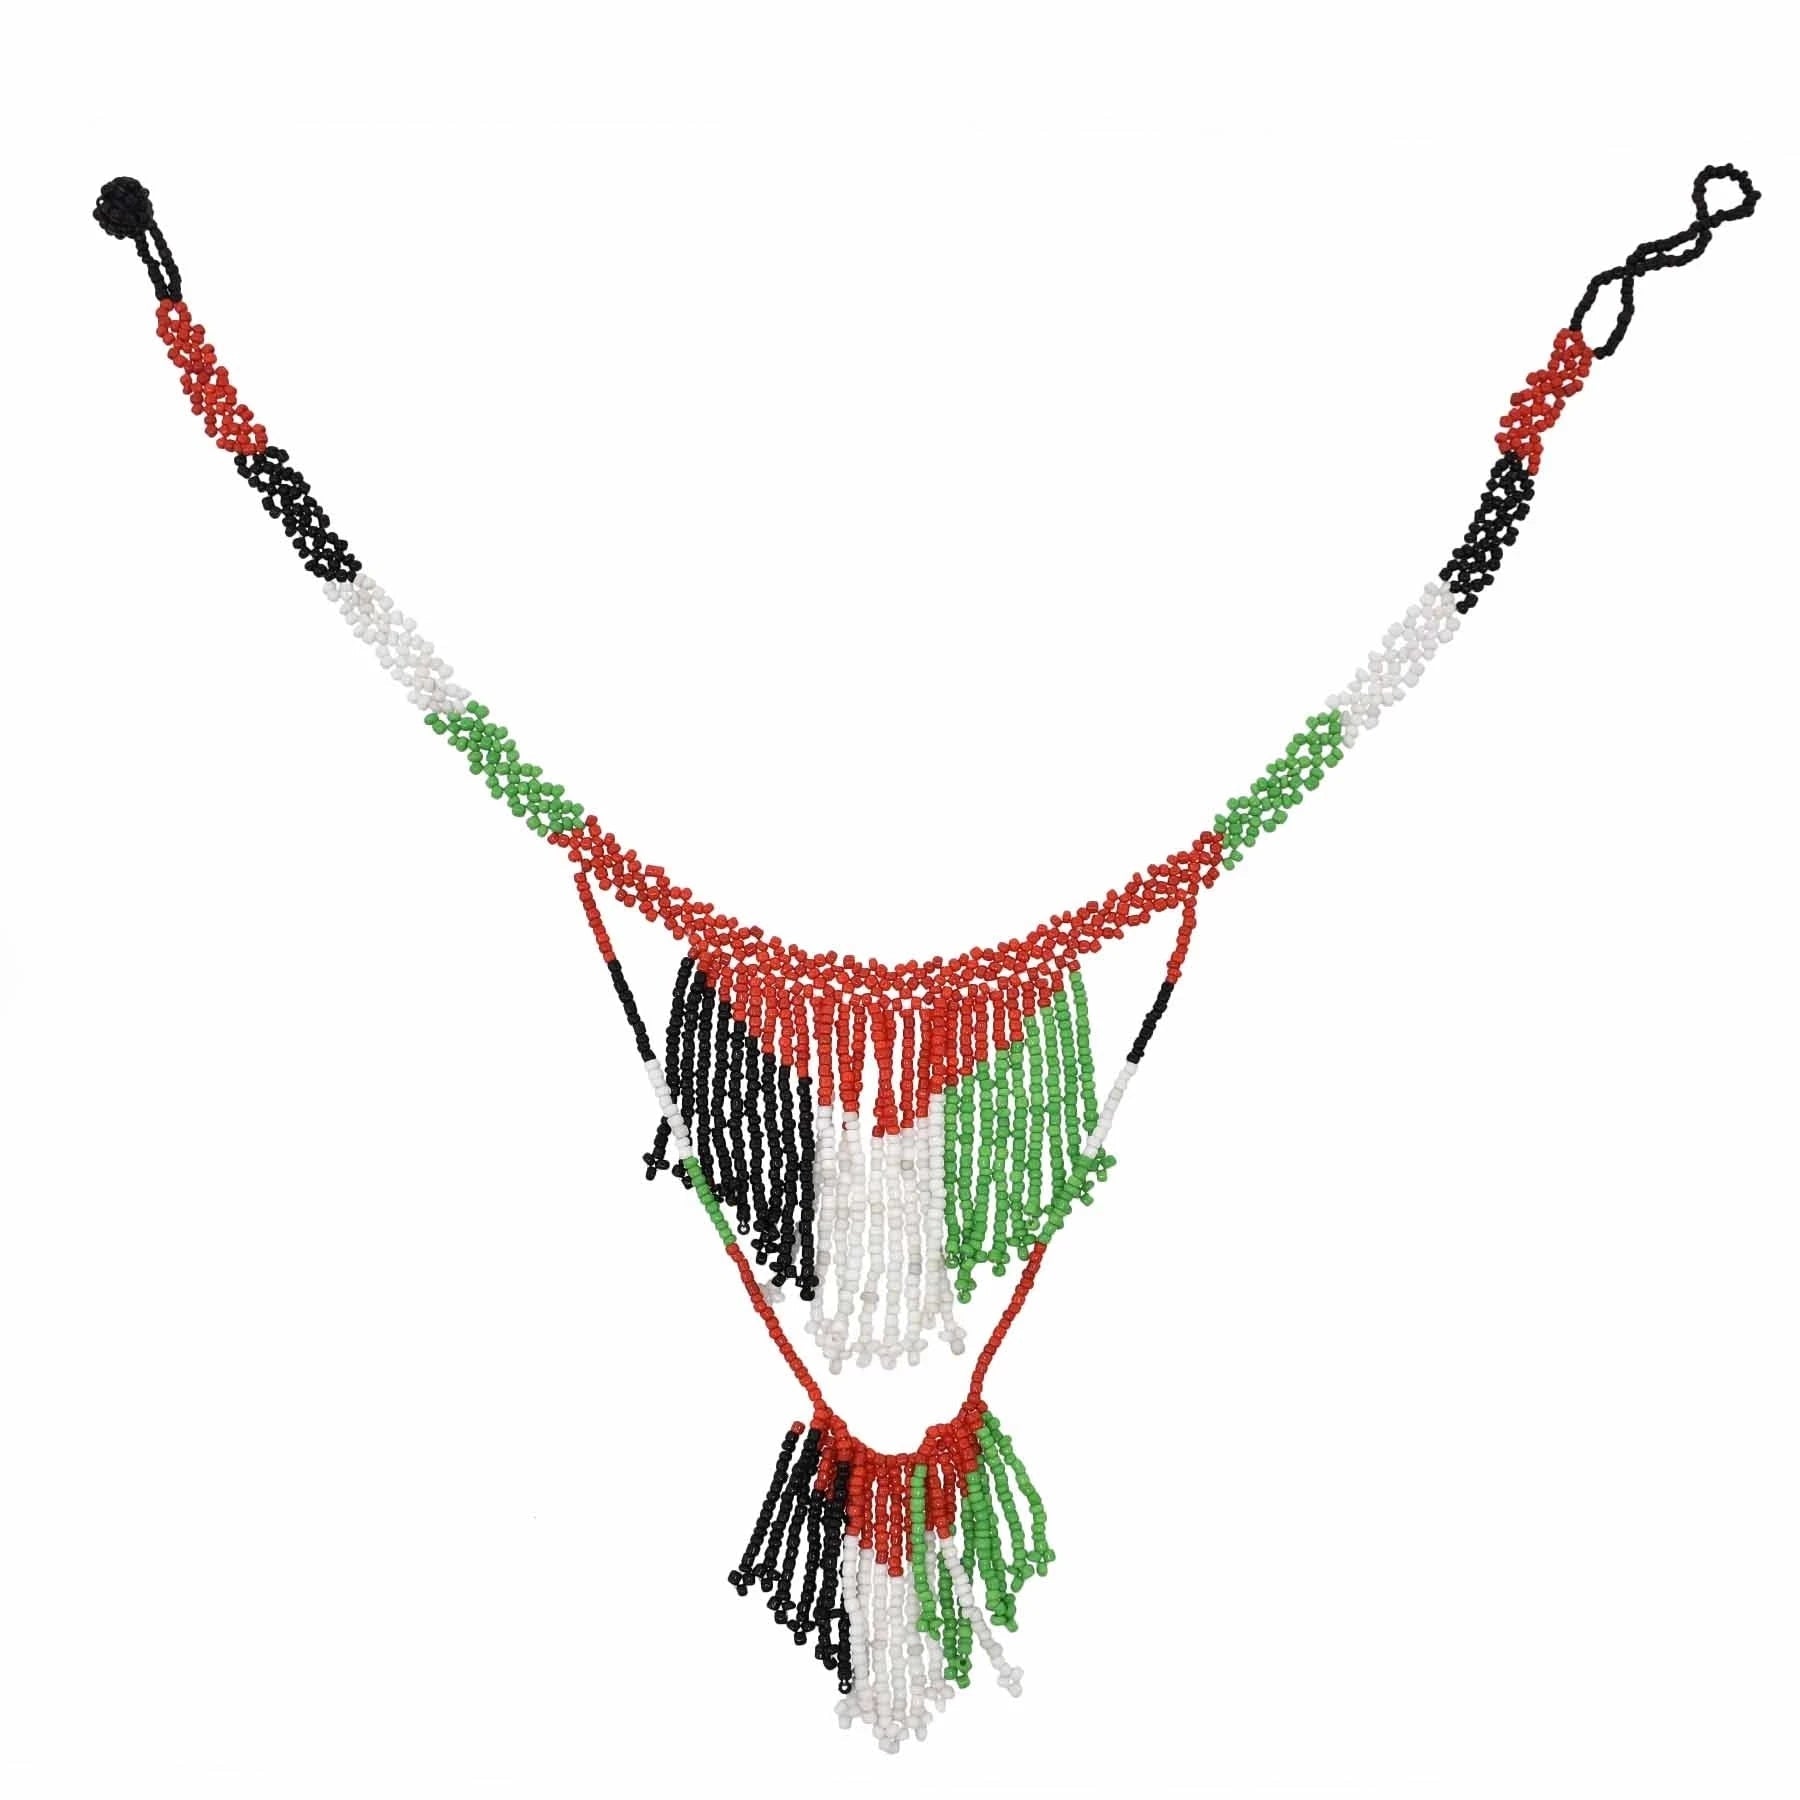 Bohemian Multicolored Beaded Choker: Vibrant Tribal Necklace for Women's Party Wear - Flexi Africa - Flexi Africa offers Free Delivery Worldwide - Vibrant African traditional clothing showcasing bold prints and intricate designs